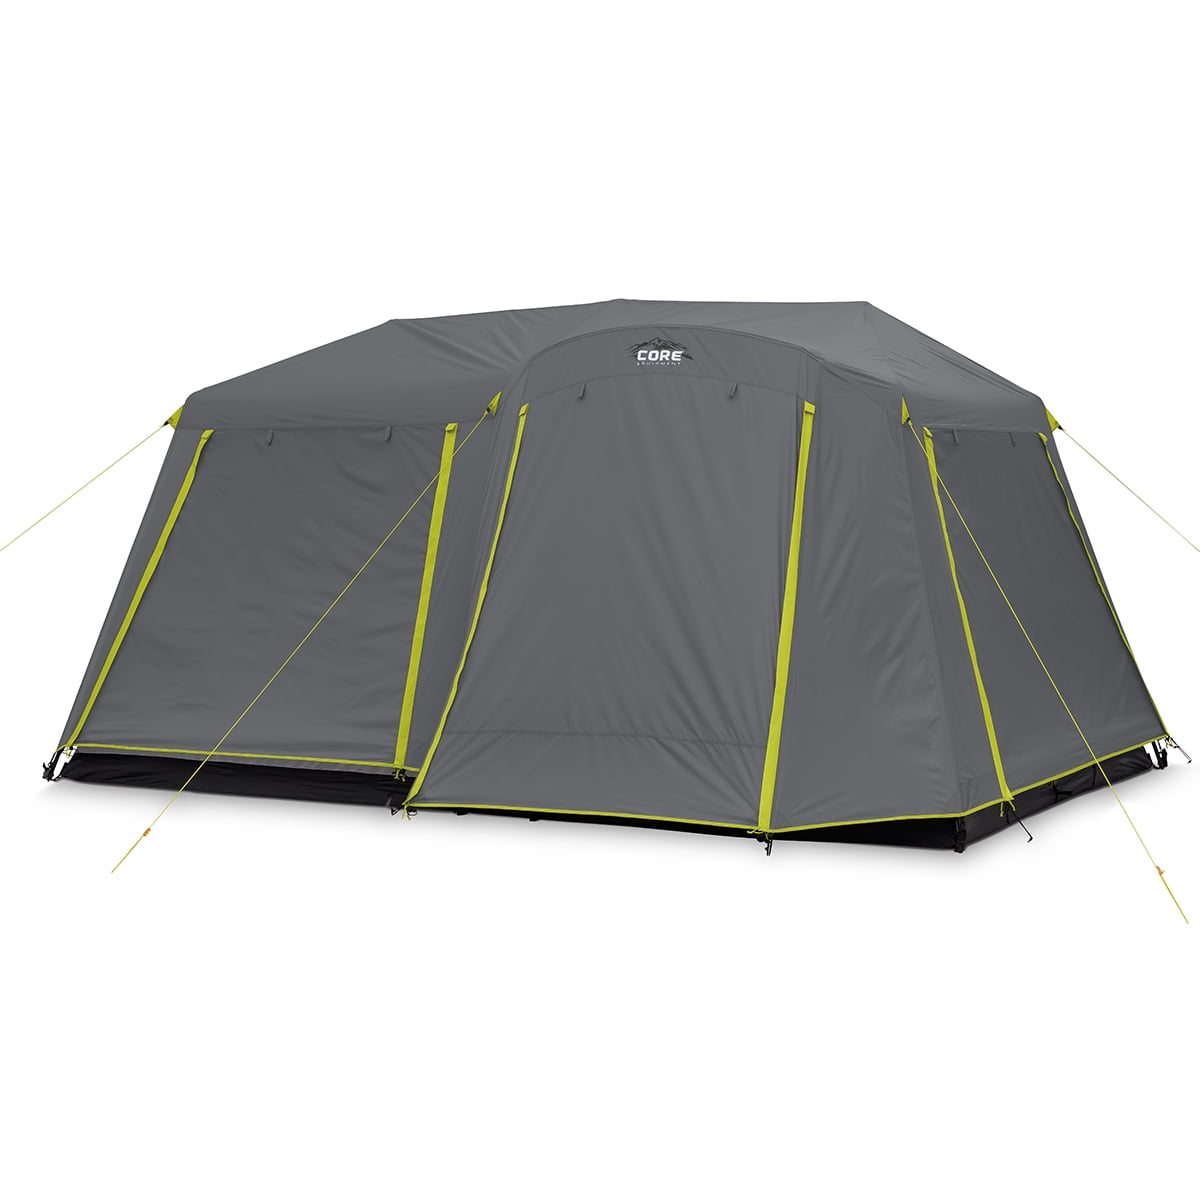 Ozark Trail Himont 1-Person Backpacking Tent with Full Fly